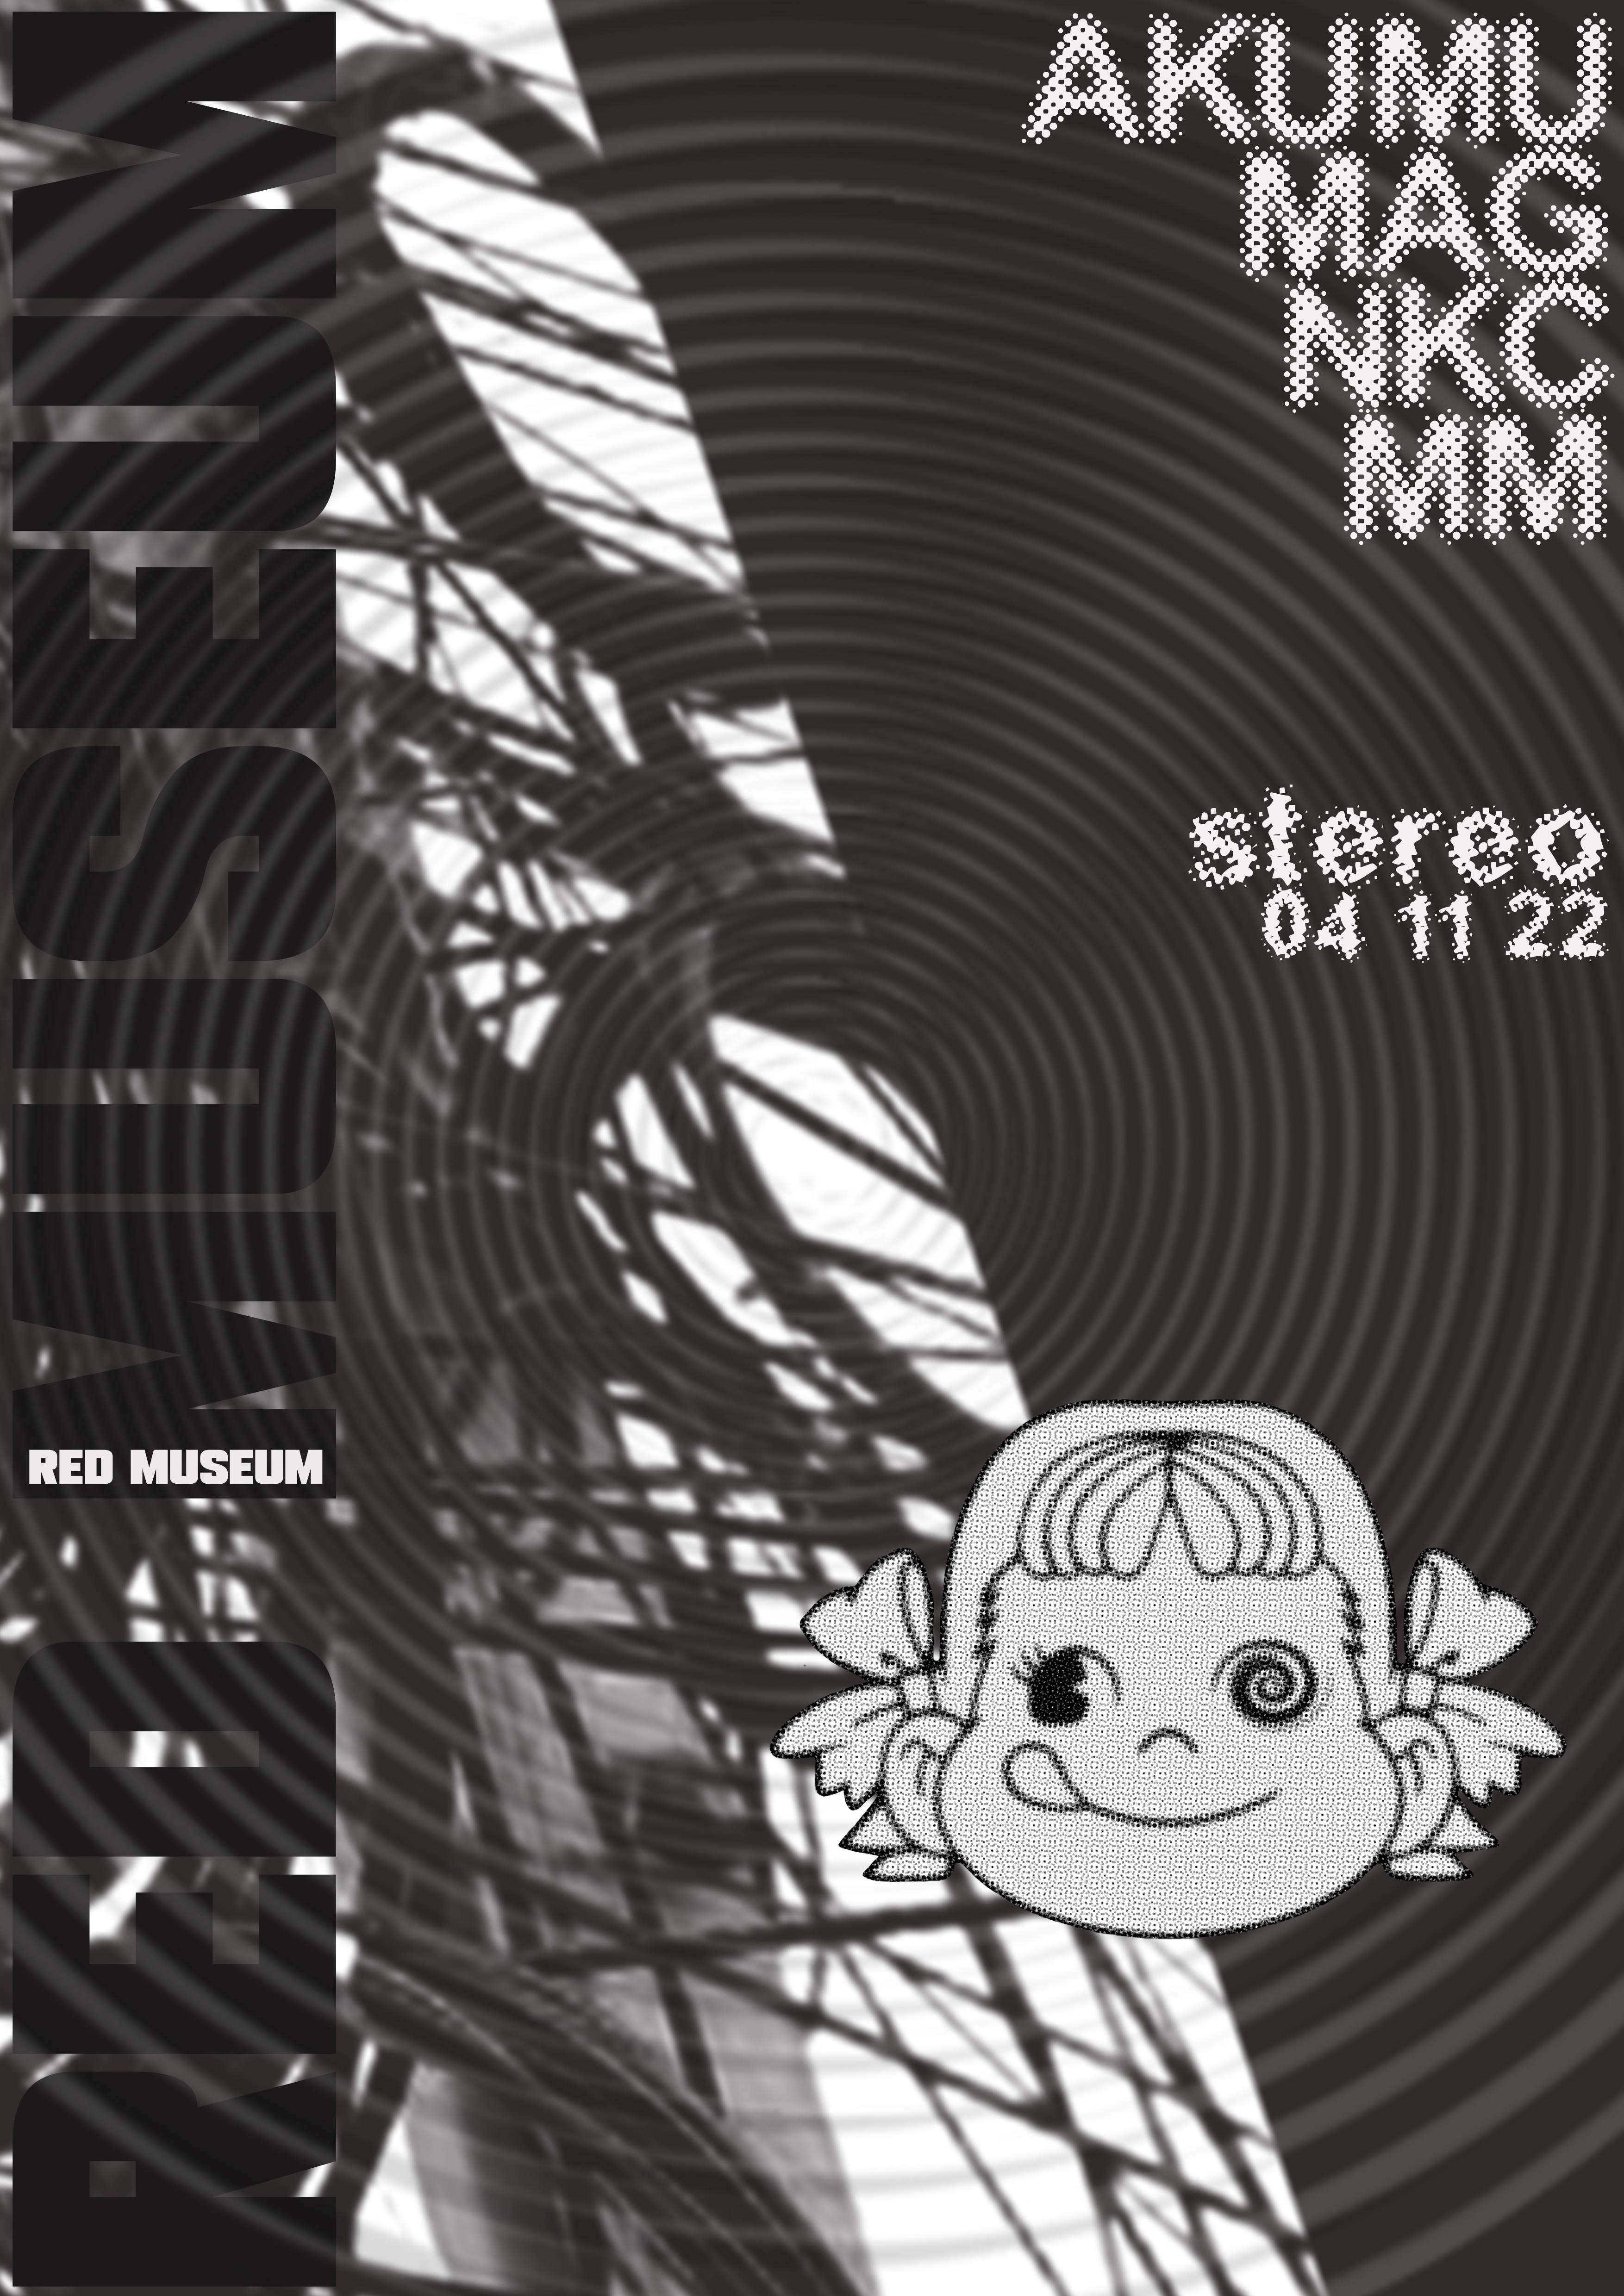 Red Museum // NKC // MM // AKUMU // MAG // Stereo GLASGOW // 04.11.22 - フライヤー表